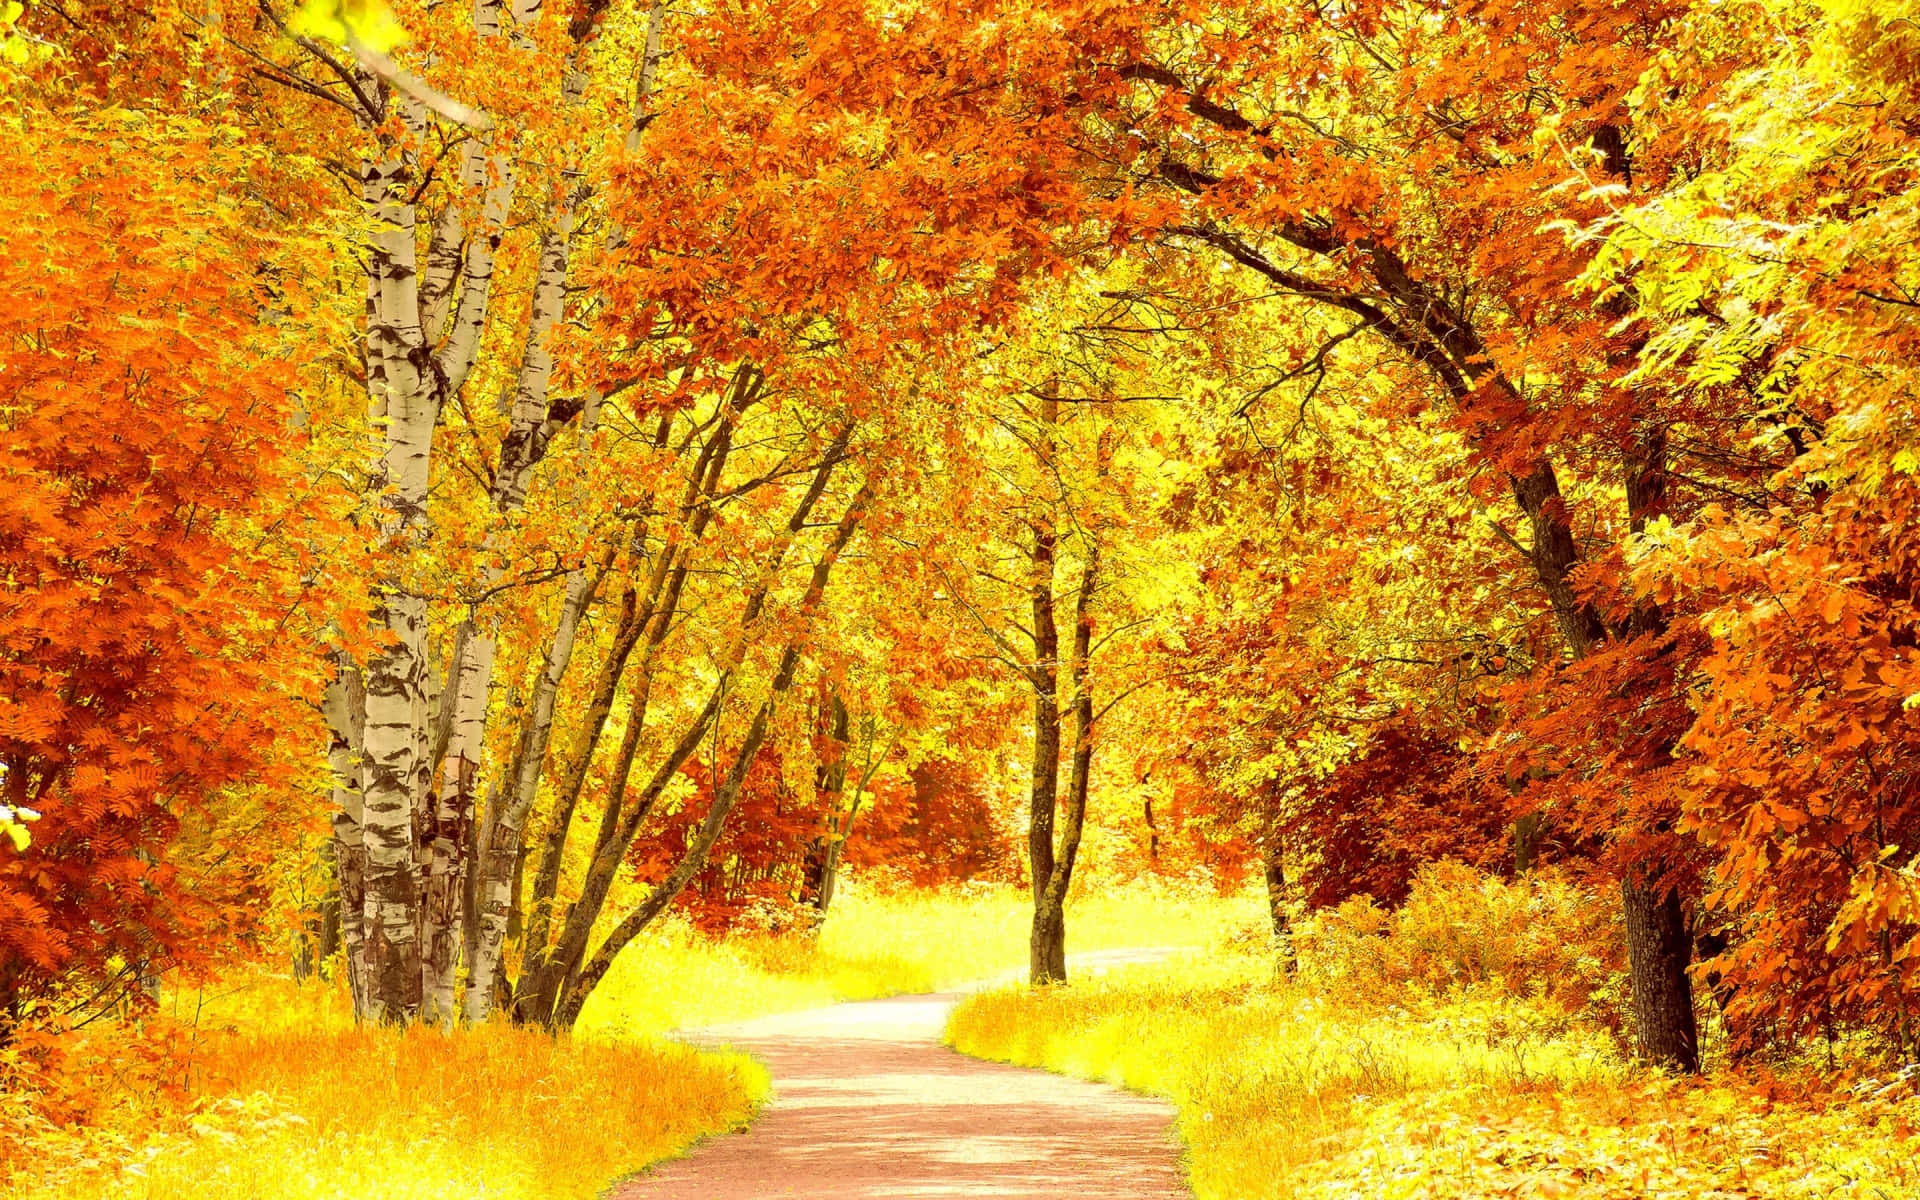 Stunning Fall Foliage Scenery in the Forest Wallpaper